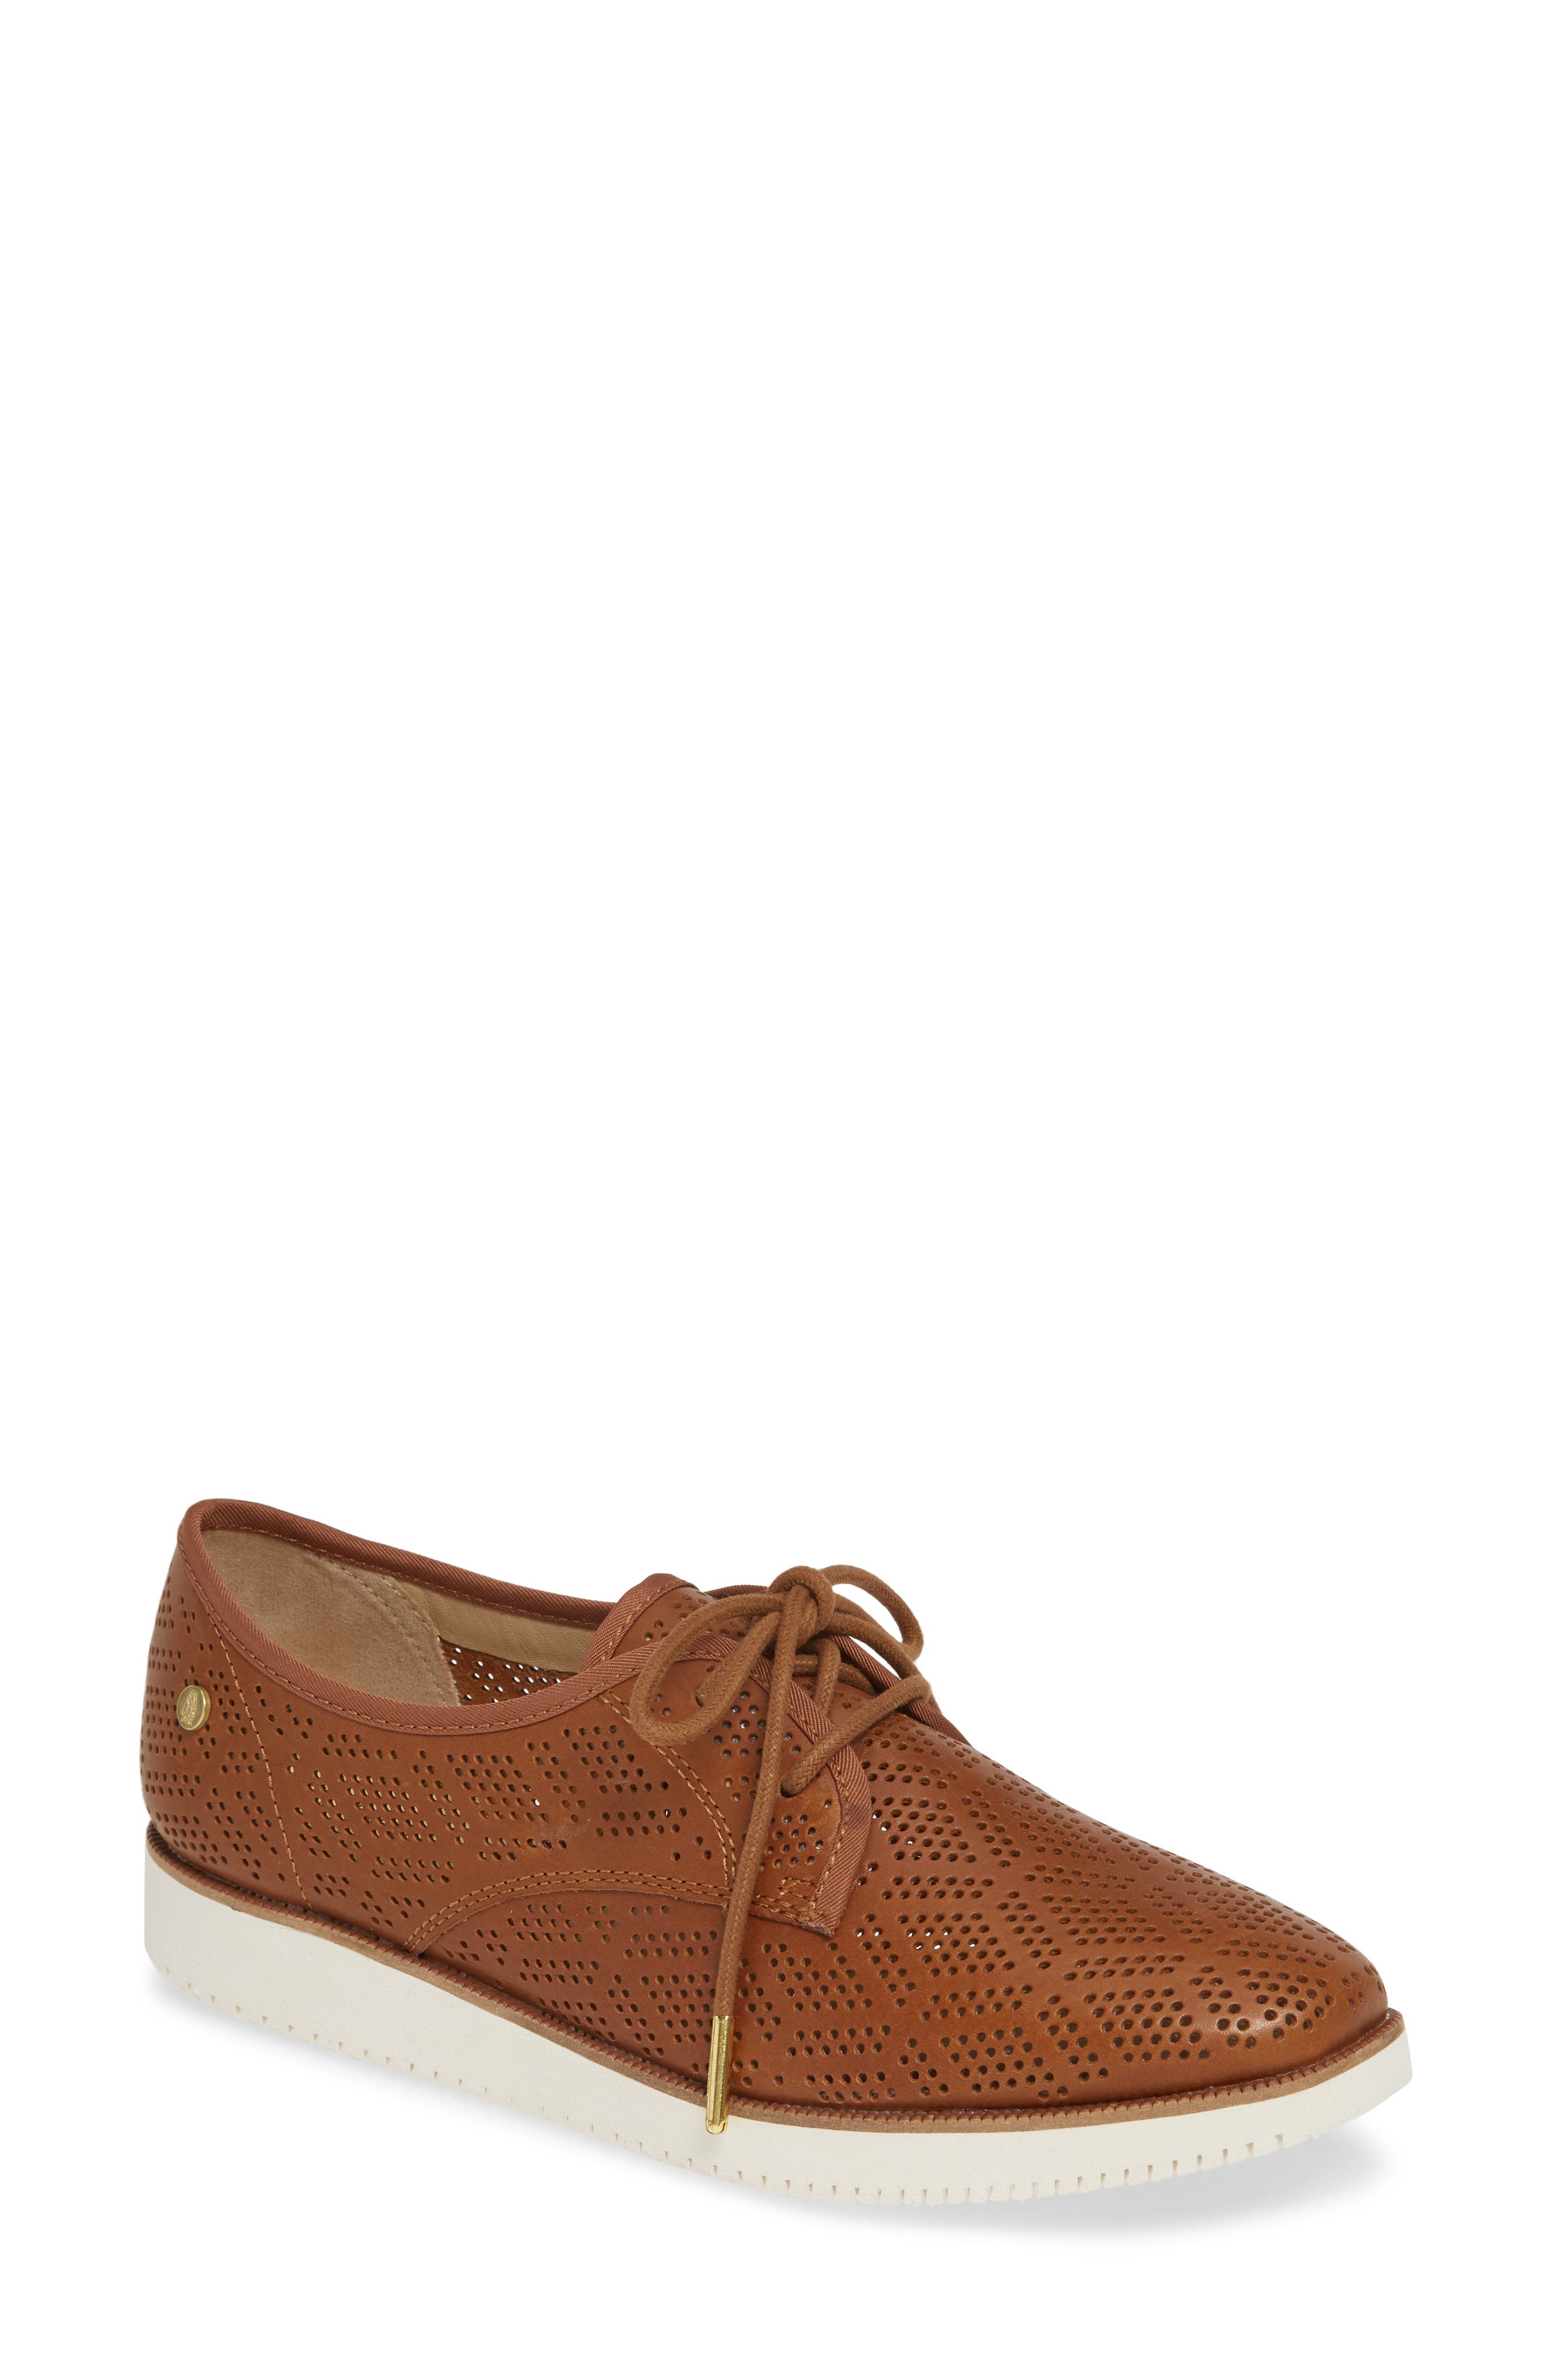 Women's Oxfords Wide Shoes | Nordstrom